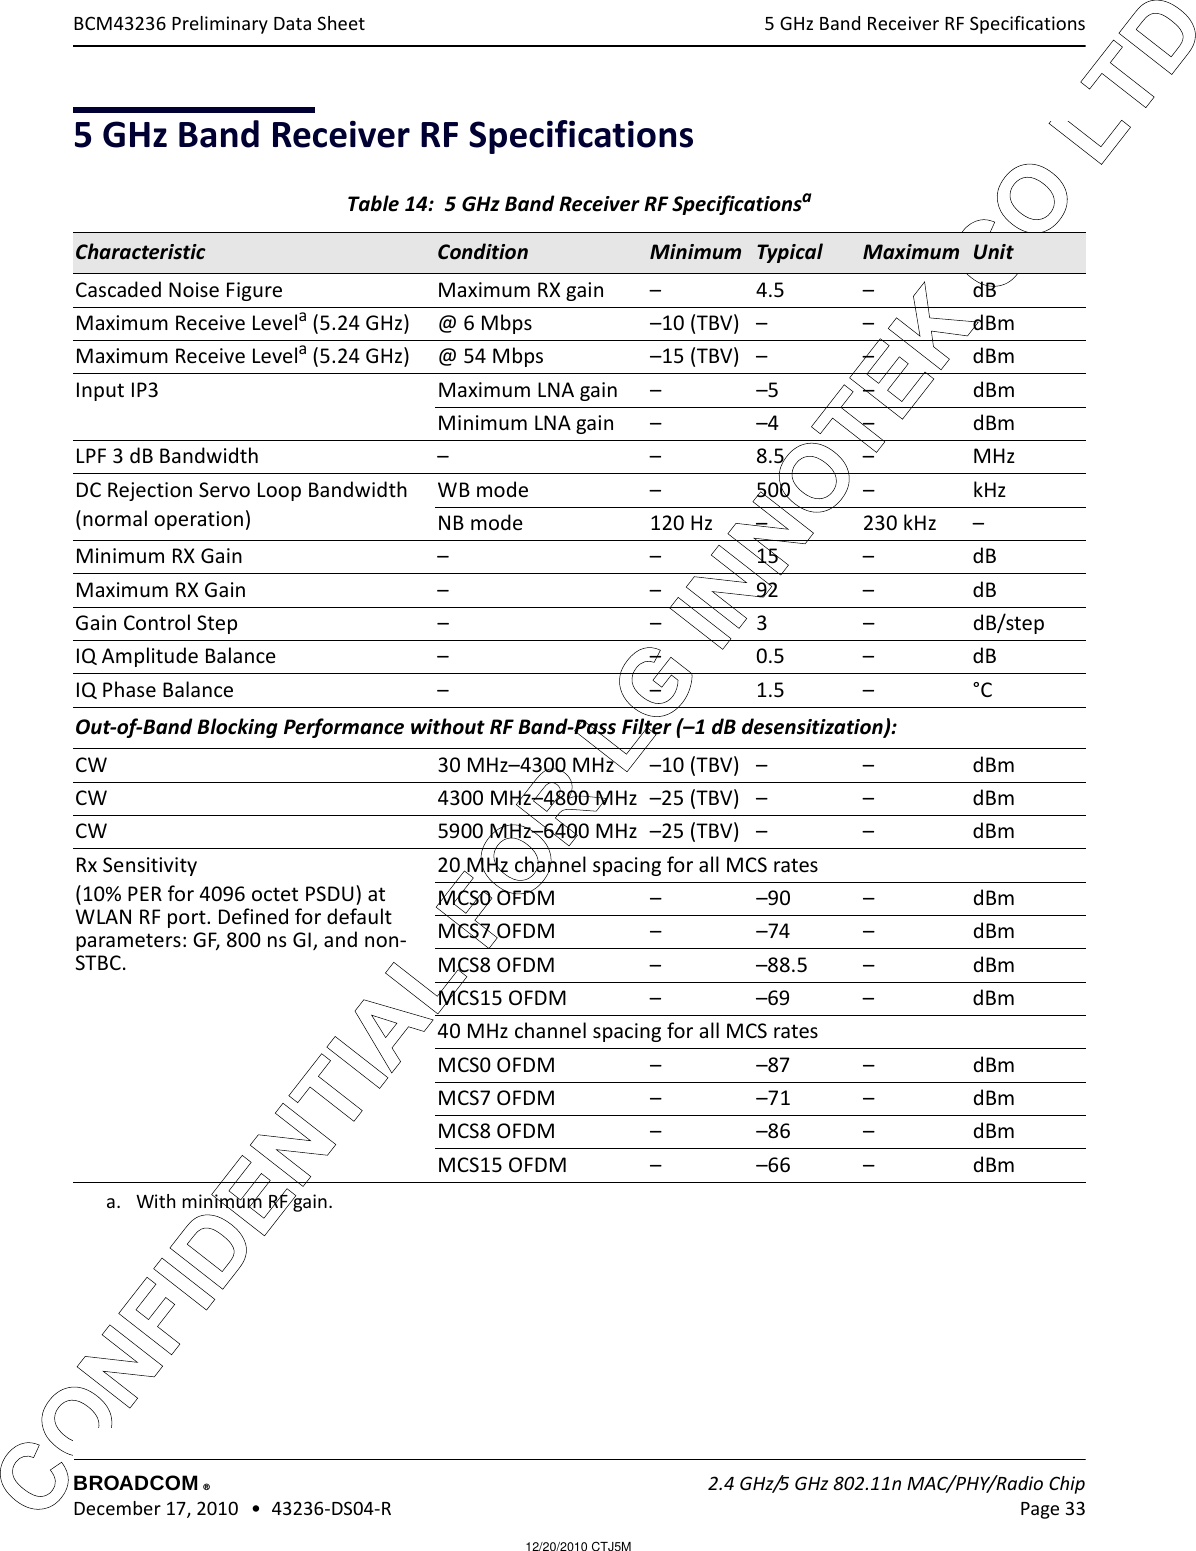 12/20/2010 CTJ5MCONFIDENTIAL FOR LG INNOTEK CO LTD 5 GHz Band Receiver RF SpecificationsBROADCOM    2.4 GHz/5 GHz 802.11n MAC/PHY/Radio Chip December 17, 2010   •  43236-DS04-R Page 33®BCM43236 Preliminary Data Sheet5 GHz Band Receiver RF SpecificationsTable 14:  5 GHz Band Receiver RF Specificationsa a. With minimum RF gain.Characteristic Condition Minimum Typical  Maximum UnitCascaded Noise Figure Maximum RX gain – 4.5 – dBMaximum Receive Levela (5.24 GHz) @ 6 Mbps –10 (TBV) – – dBmMaximum Receive Levela (5.24 GHz) @ 54 Mbps –15 (TBV) – – dBmInput IP3 Maximum LNA gain – –5  – dBmMinimum LNA gain – –4 – dBmLPF 3 dB Bandwidth – – 8.5 – MHzDC Rejection Servo Loop Bandwidth(normal operation)WB mode – 500 – kHzNB mode 120 Hz – 230 kHz  –Minimum RX Gain – – 15 – dBMaximum RX Gain – – 92 – dBGain Control Step – – 3 – dB/stepIQ Amplitude Balance – – 0.5 – dBIQ Phase Balance – – 1.5 – °COut-of-Band Blocking Performance without RF Band-Pass Filter (–1 dB desensitization):CW 30 MHz–4300 MHz –10 (TBV) – – dBmCW 4300 MHz–4800 MHz –25 (TBV) – – dBmCW 5900 MHz–6400 MHz –25 (TBV) – – dBmRx Sensitivity(10% PER for 4096 octet PSDU) at WLAN RF port. Defined for default parameters: GF, 800 ns GI, and non-STBC.20 MHz channel spacing for all MCS ratesMCS0 OFDM – –90 – dBmMCS7 OFDM – –74 – dBmMCS8 OFDM – –88.5 – dBmMCS15 OFDM – –69 – dBm40 MHz channel spacing for all MCS ratesMCS0 OFDM – –87 – dBmMCS7 OFDM – –71 – dBmMCS8 OFDM – –86 – dBmMCS15 OFDM – –66 – dBm